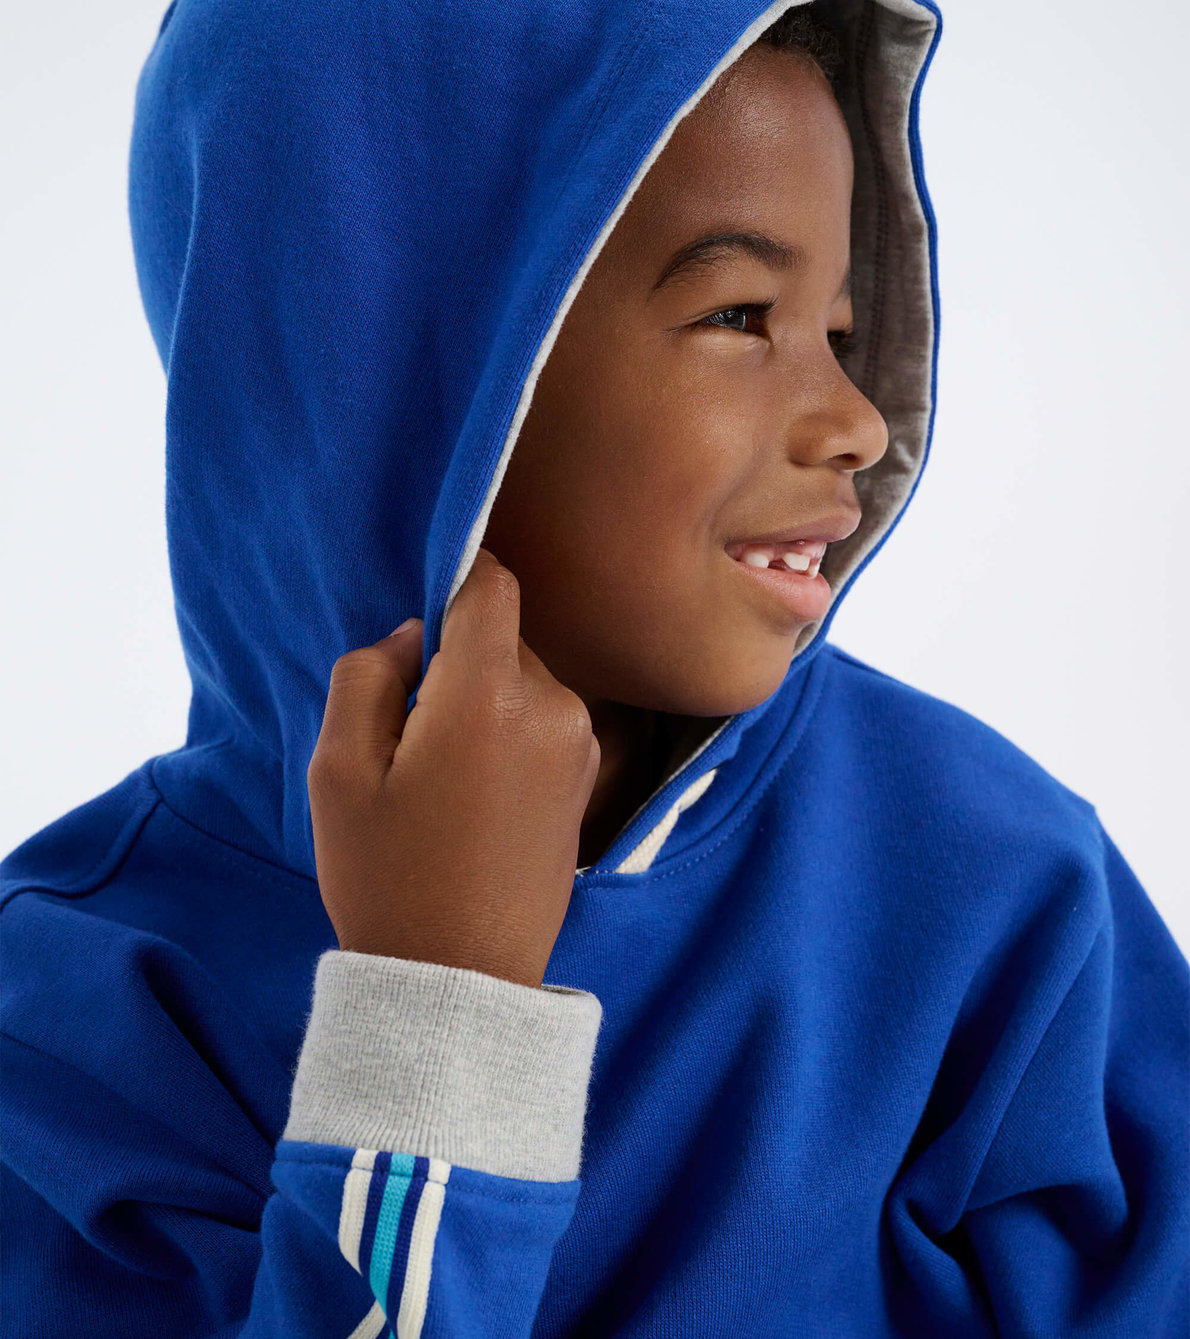 View larger image of Boys Blue Pullover Terry Sweatshirt